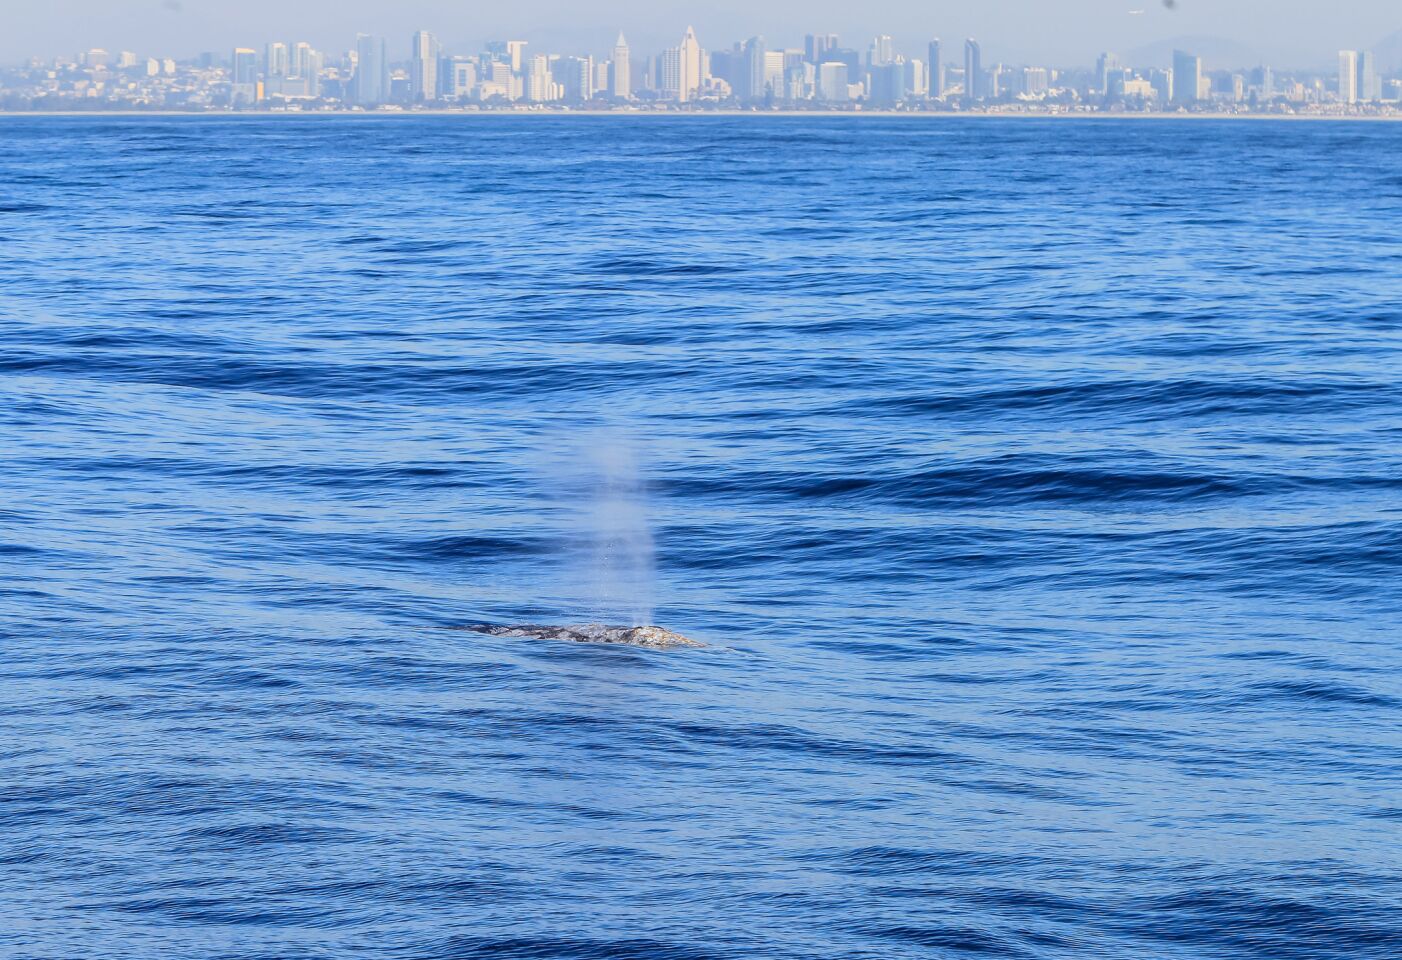 Skyline views and an Eastern Pacific gray whale.